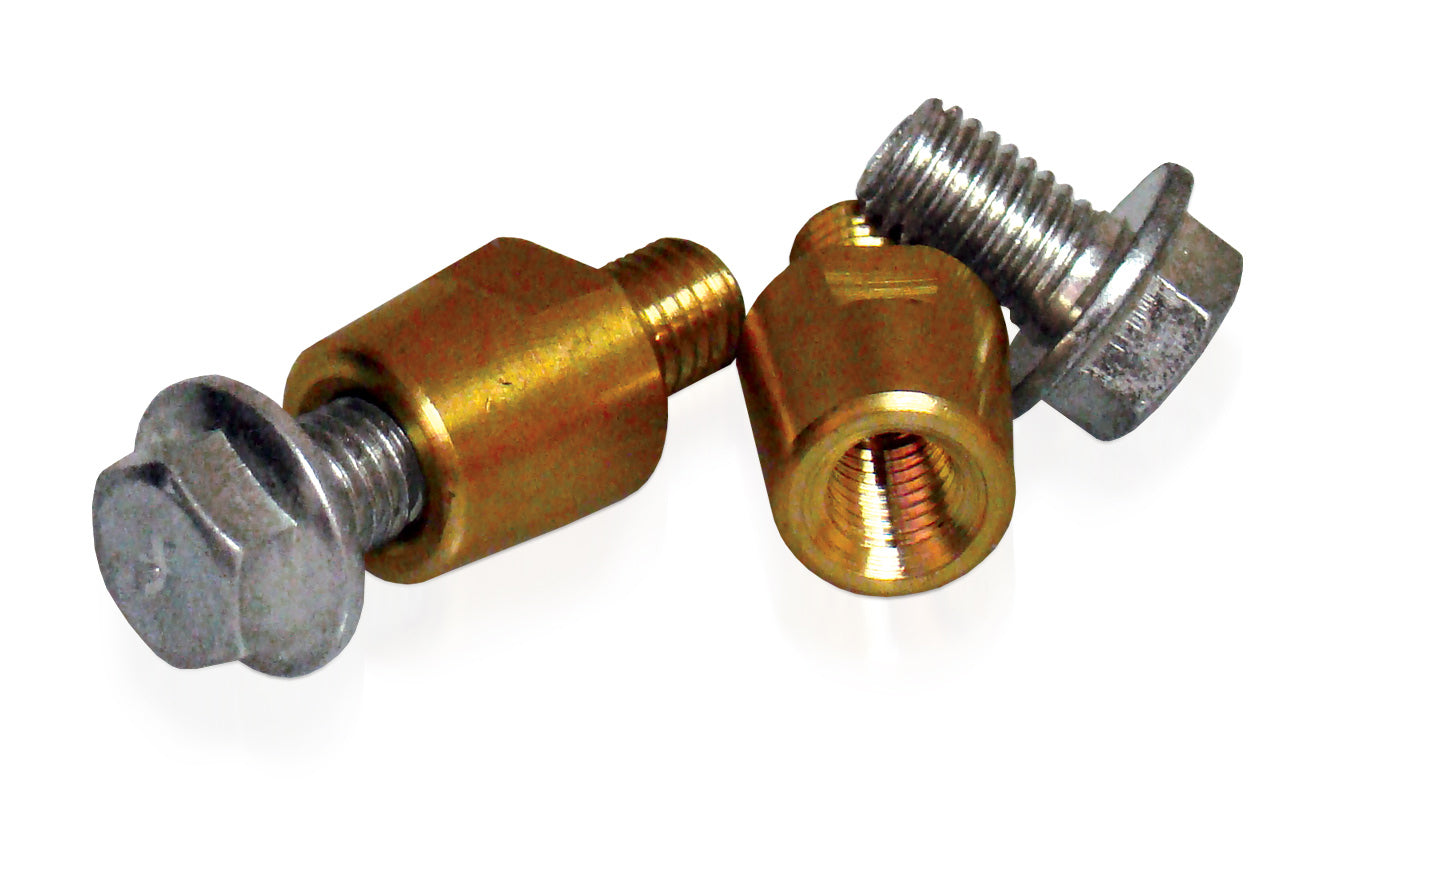 XS Power 575 XP1000 Brass Post Adaptors and Bolts M10 Threads